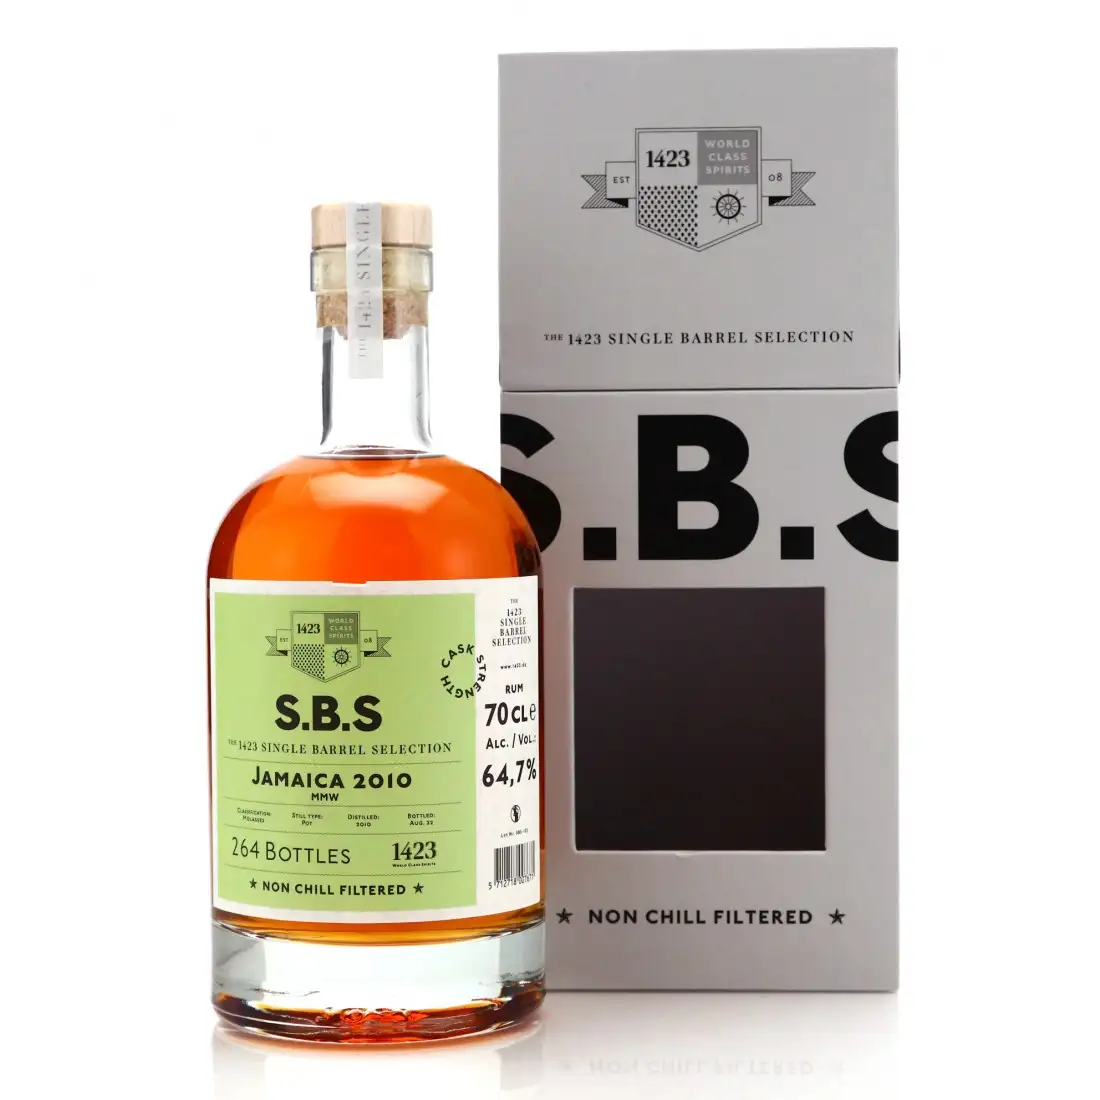 Image of the front of the bottle of the rum S.B.S Jamaica 2010 MMW